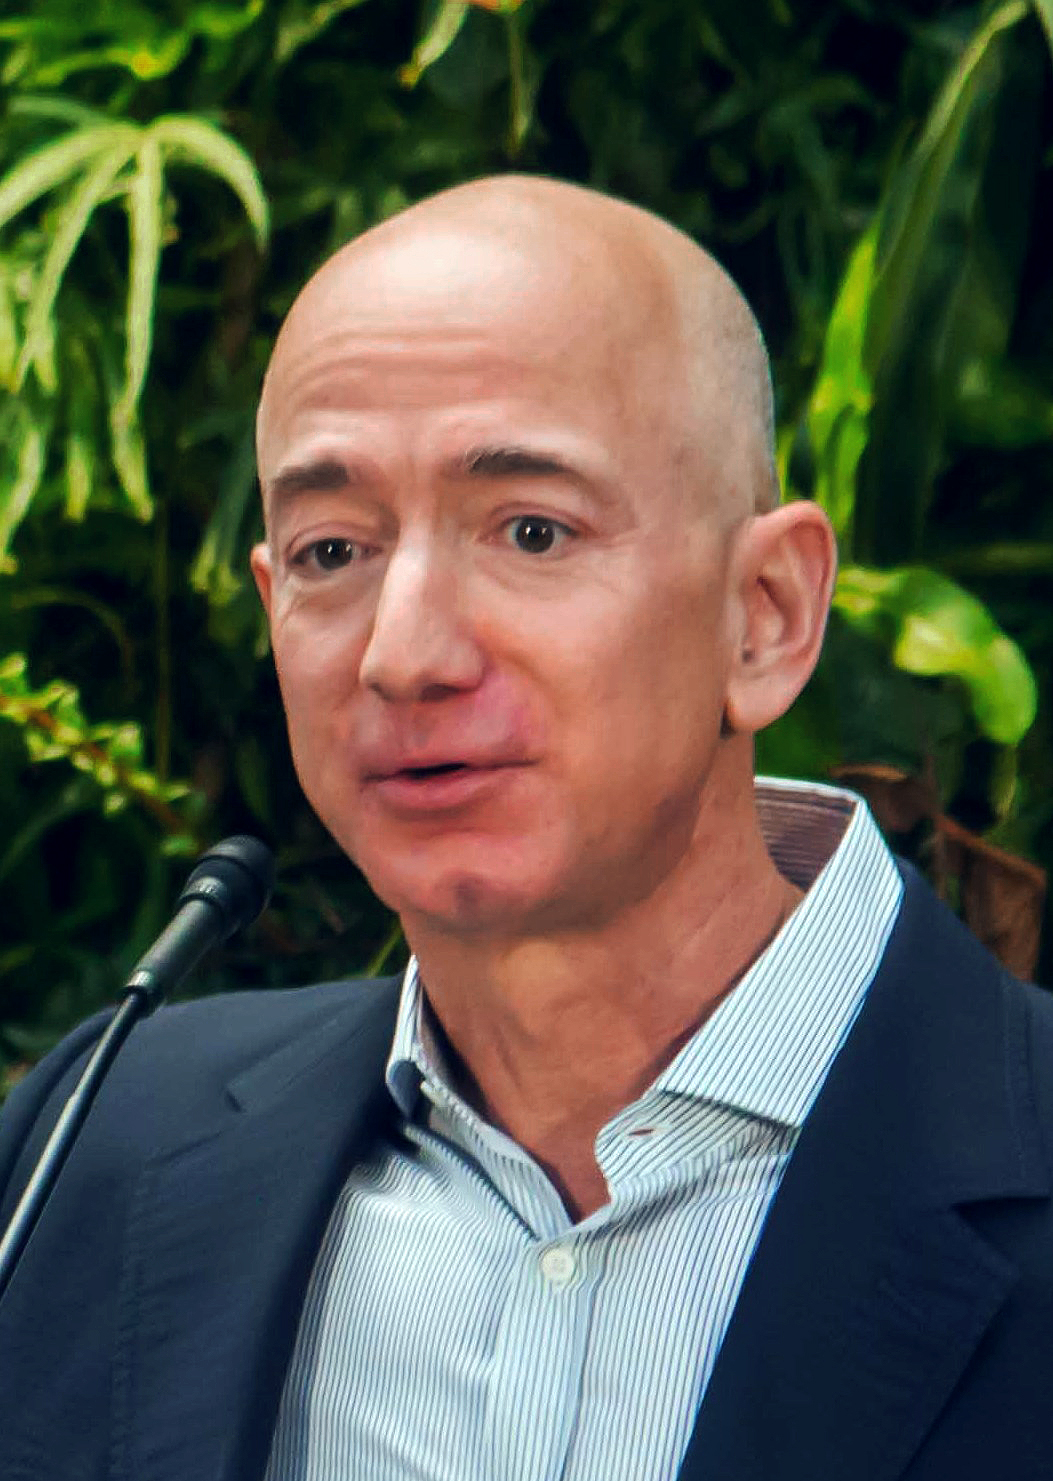 Jeff Bezos to receive 75% stake in Amazon after separation 